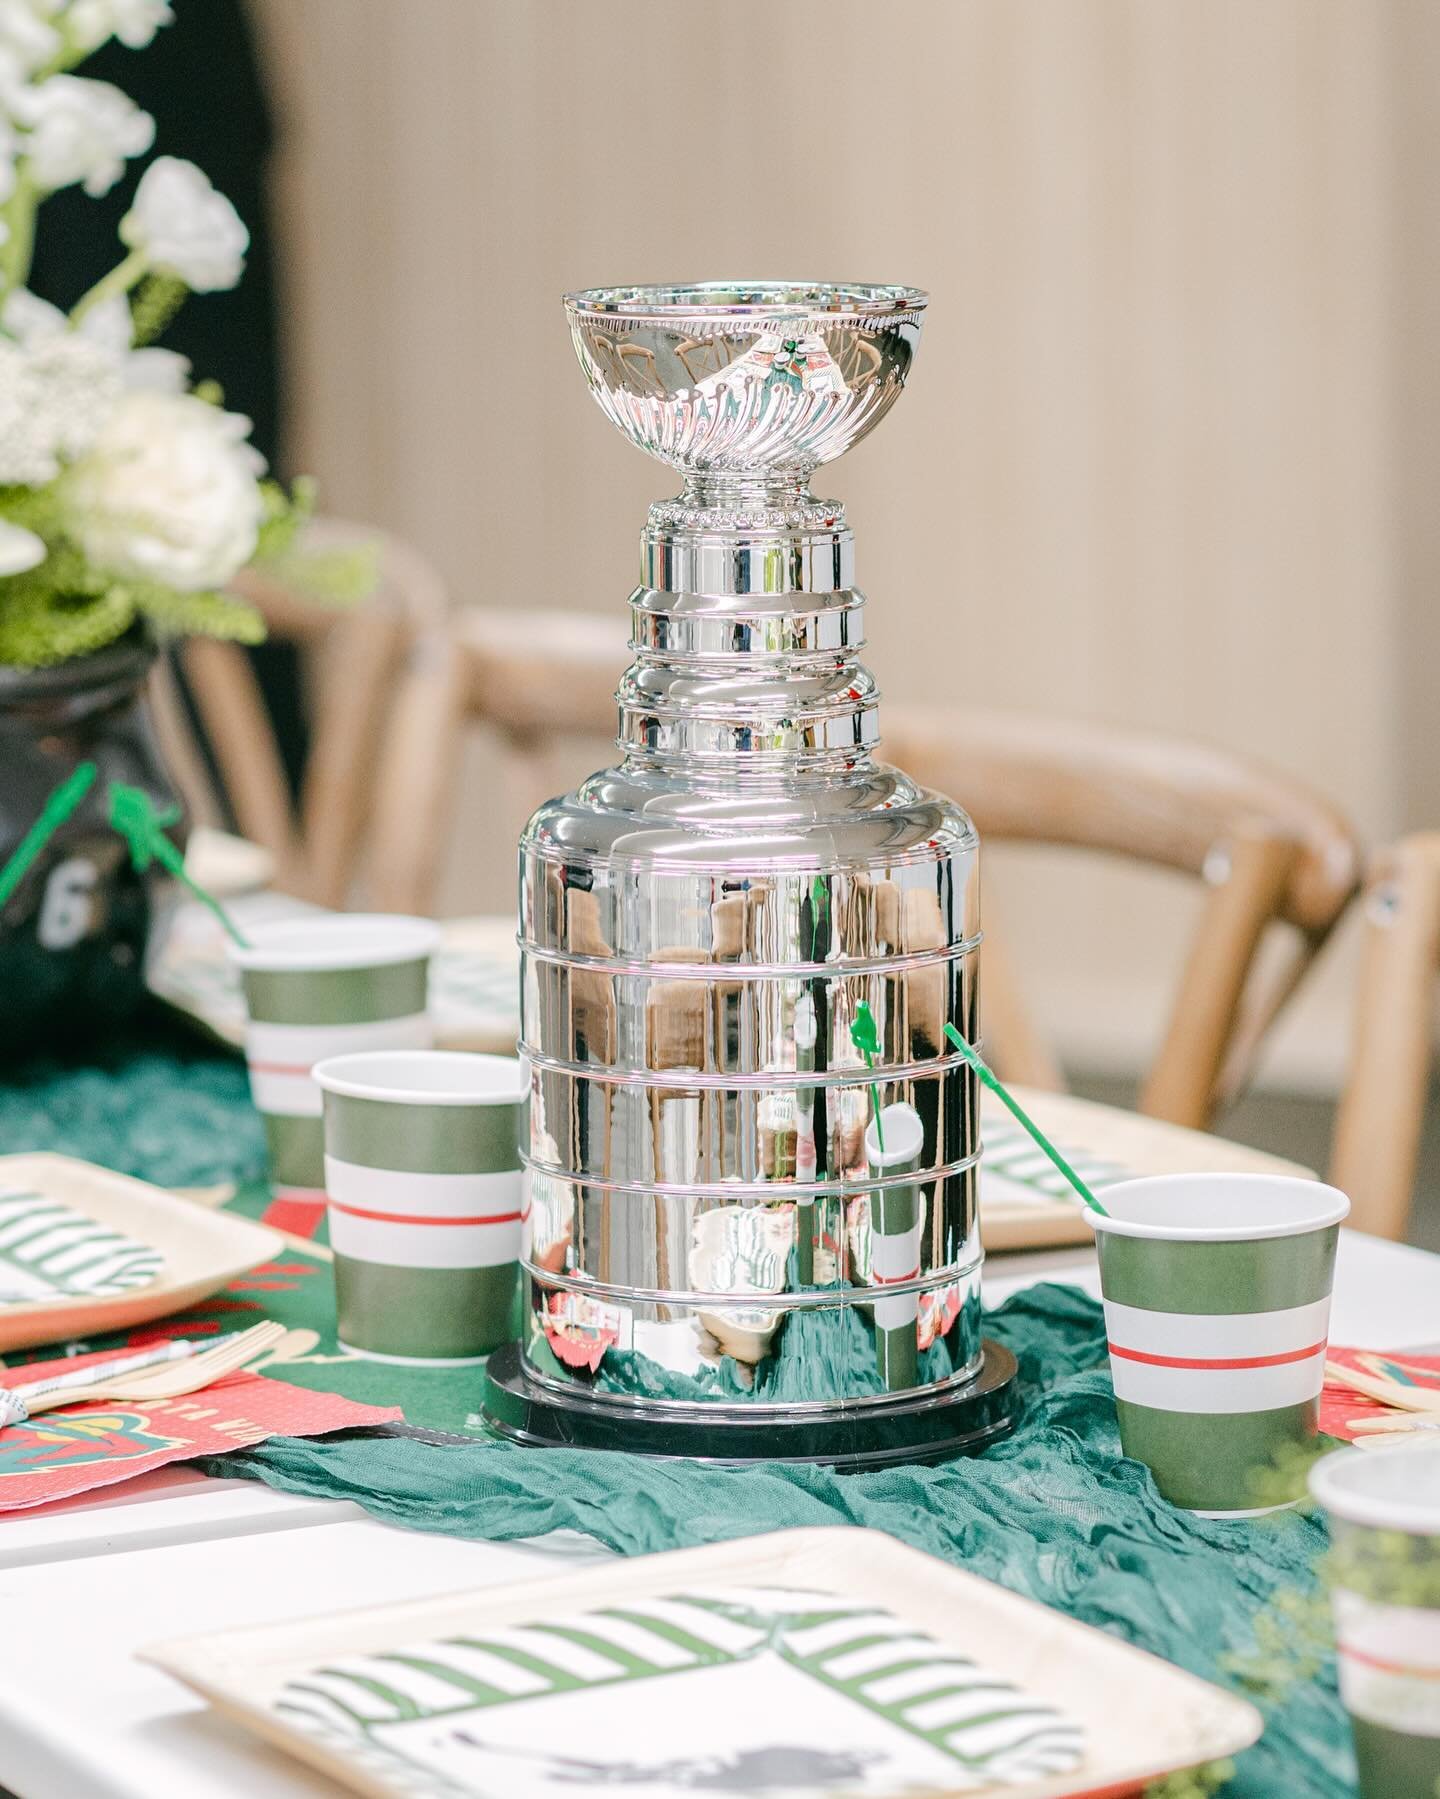 🥅 Cameron&rsquo;s Hat Trick Birthday pt 2 🥅

Design, Floral &amp; Decor @northern_urbanity_events 
Photograpy @lollipopmedia_mn 
Ball pit @cielorentals 
Kids table scape @jennarushevents 
Hockey puck engraving @sunrisemillwork 
Graphics @avis.mary.